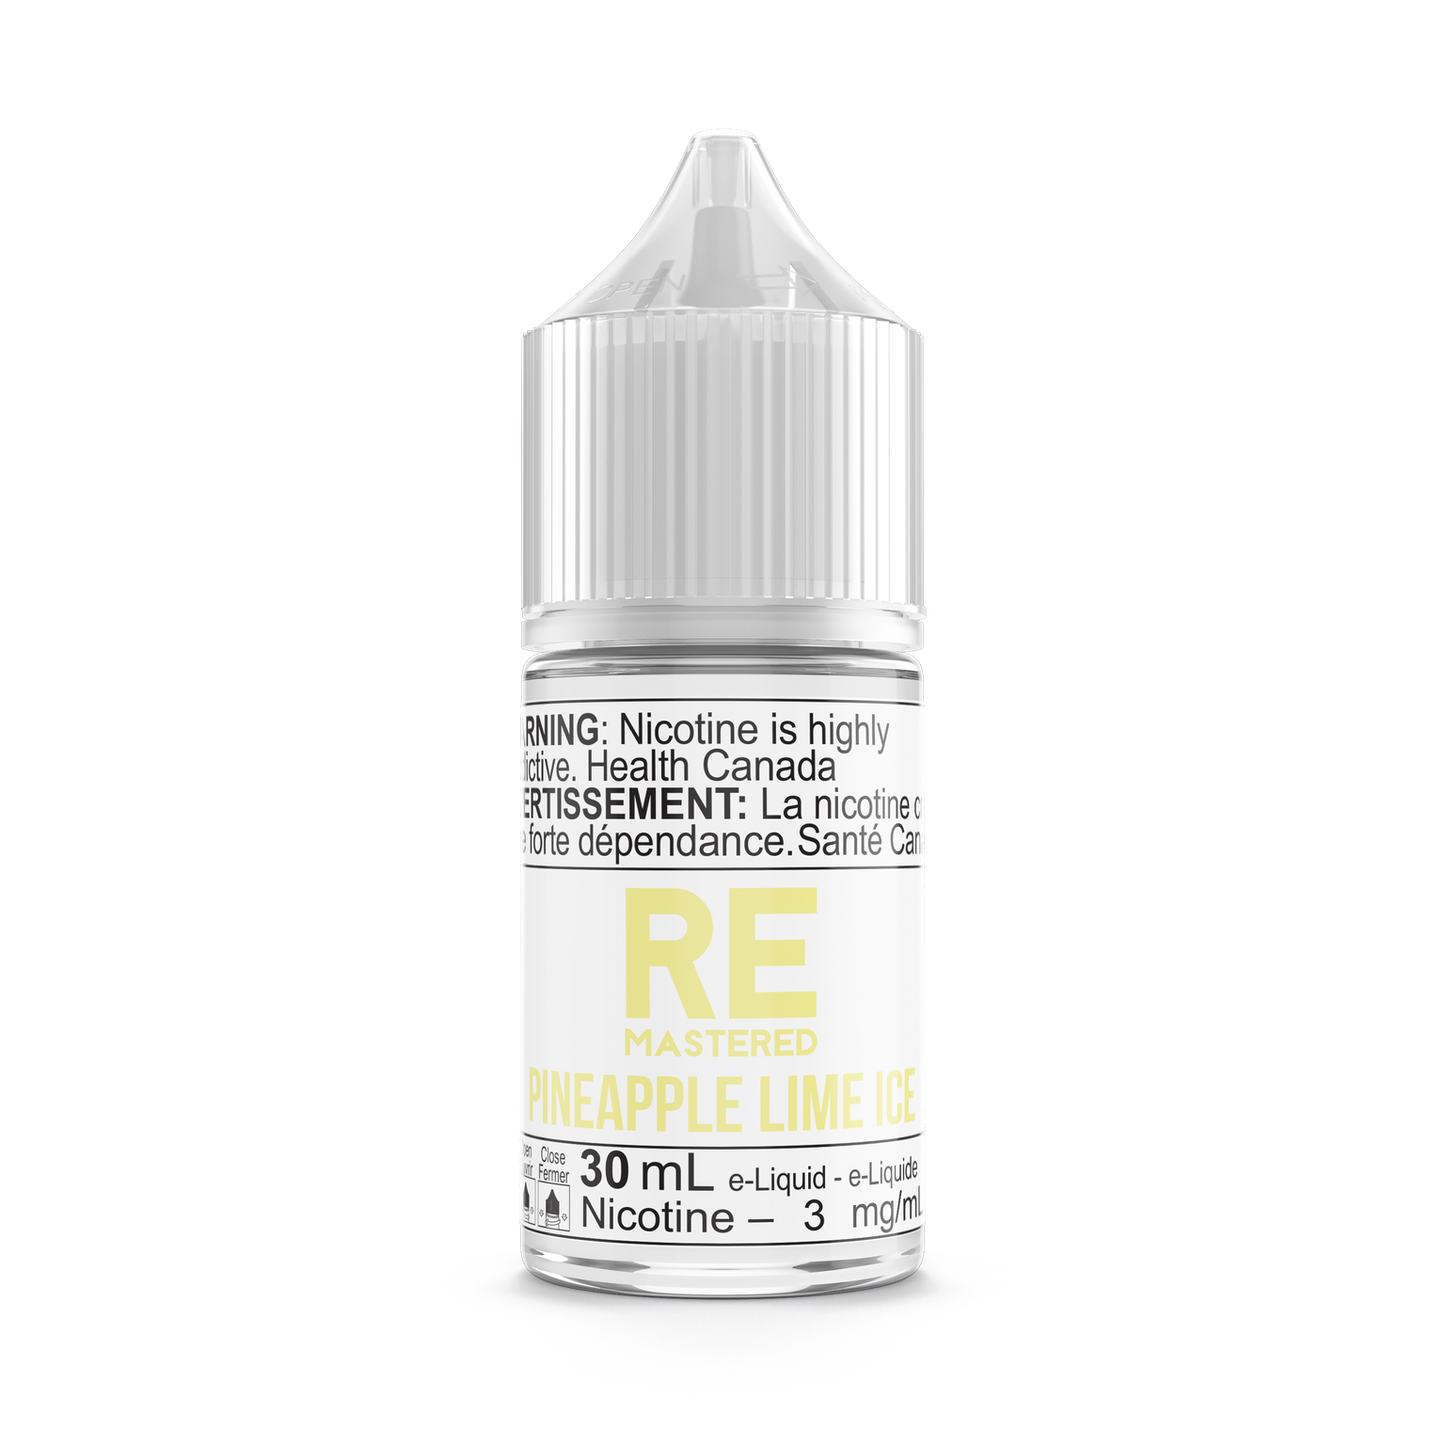 Pineapple Lime Ice by Remastered